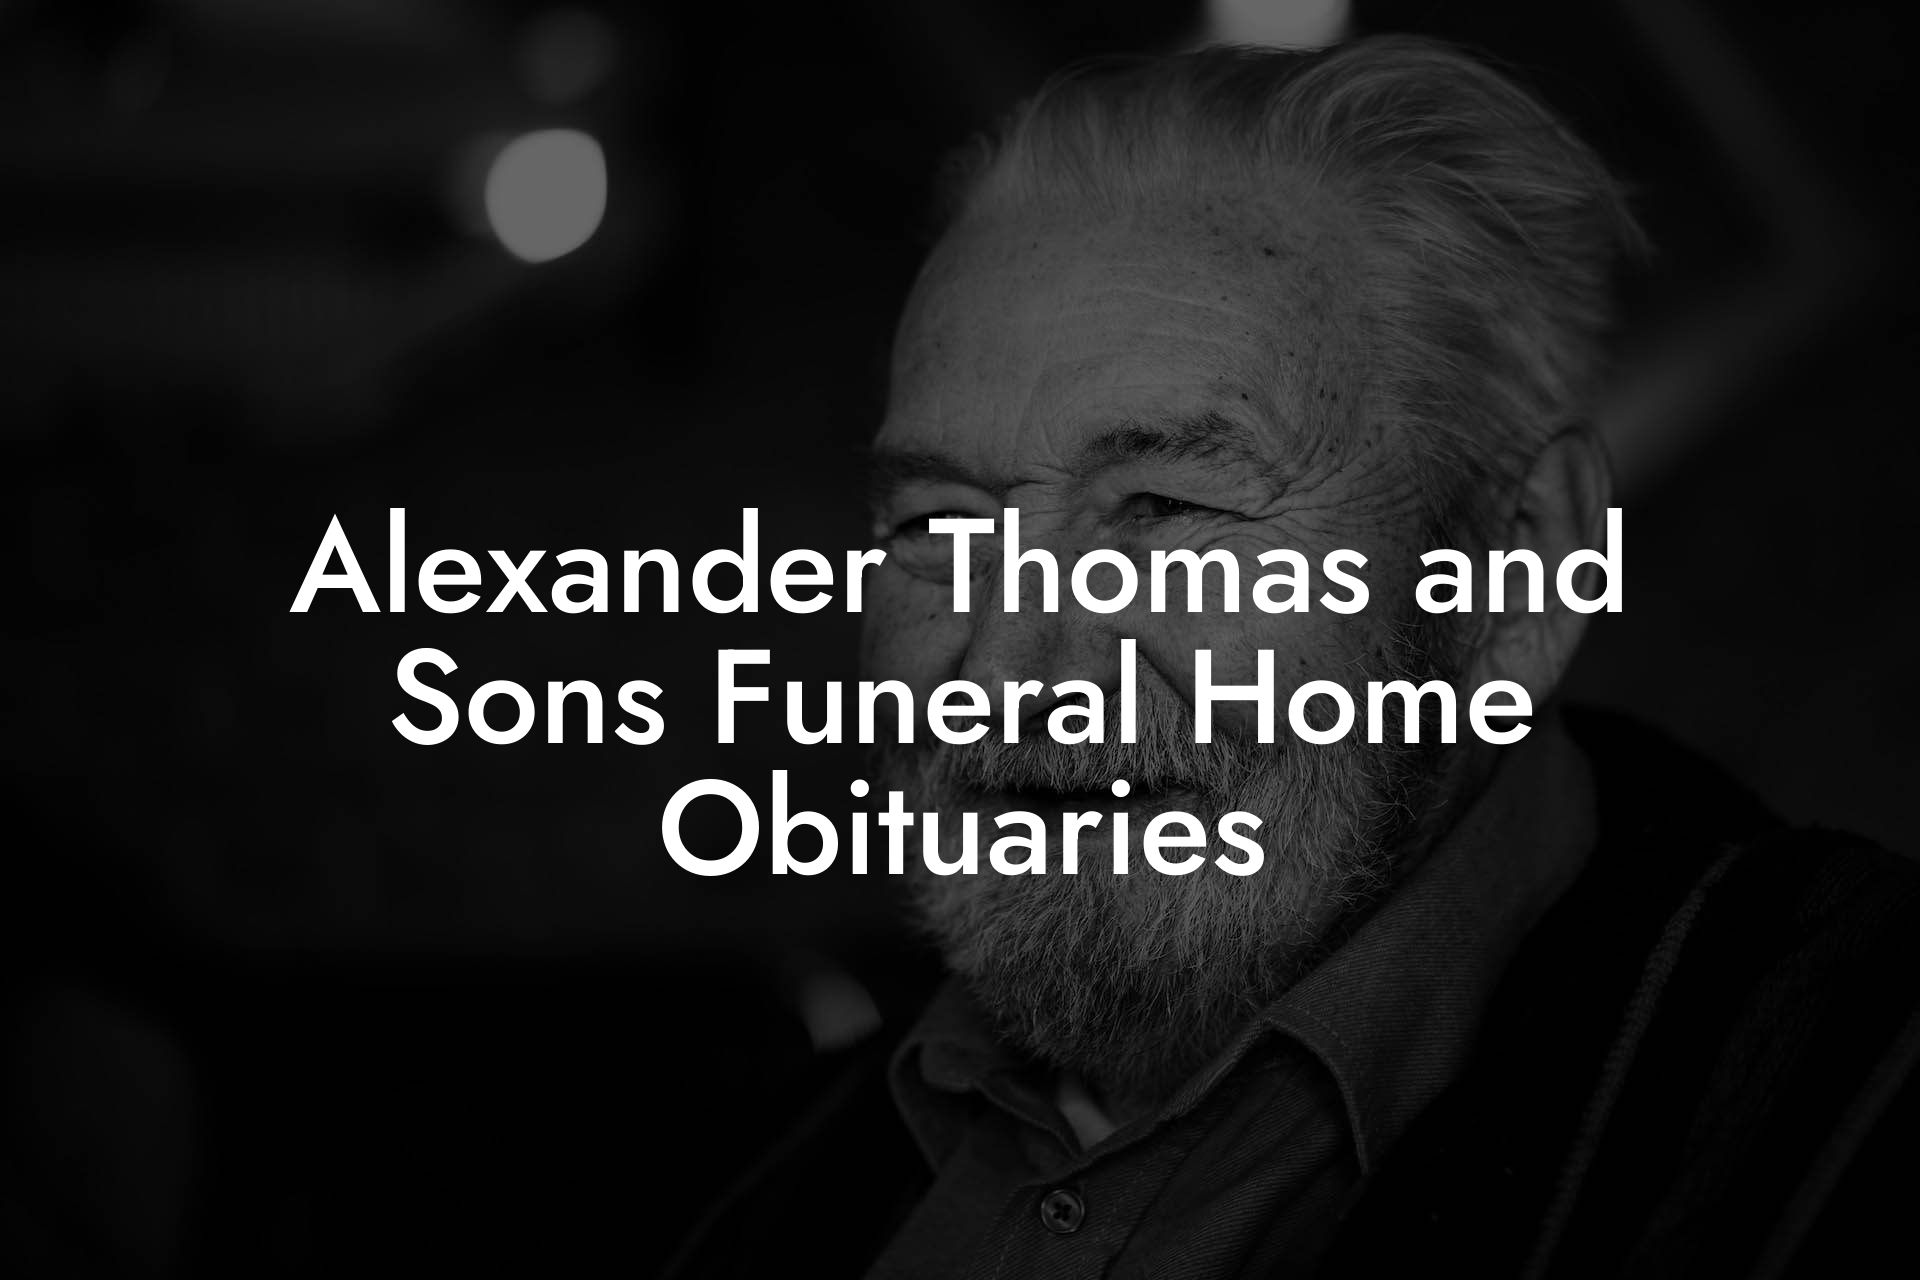 Alexander Thomas and Sons Funeral Home Obituaries